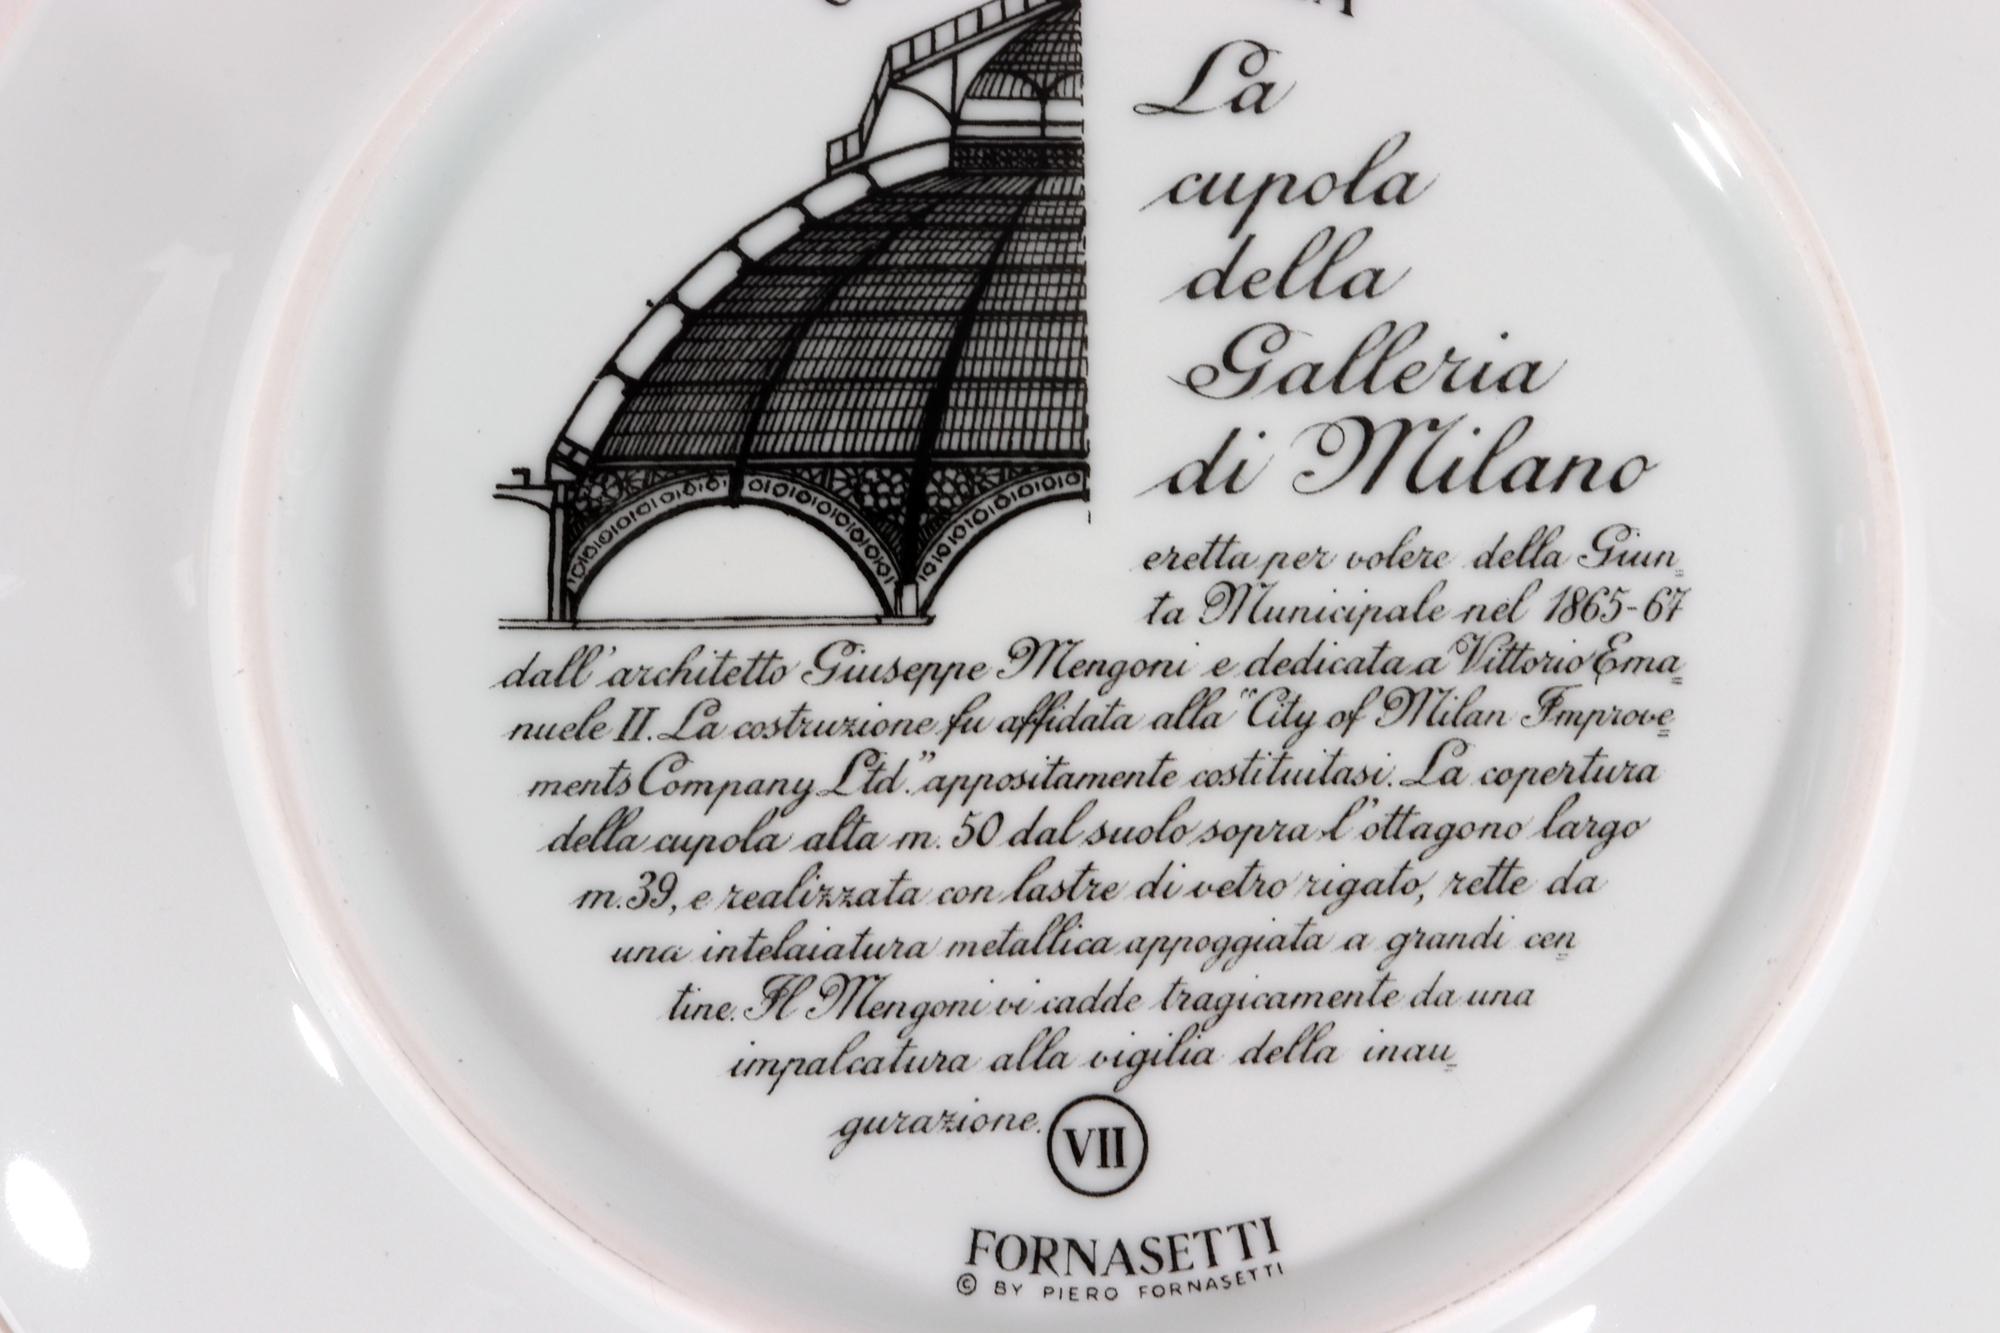 Fornasetti Dome Teller, Kuppel Galleria Di Milano Nummer 7 in Serie im Zustand „Gut“ im Angebot in Downingtown, PA